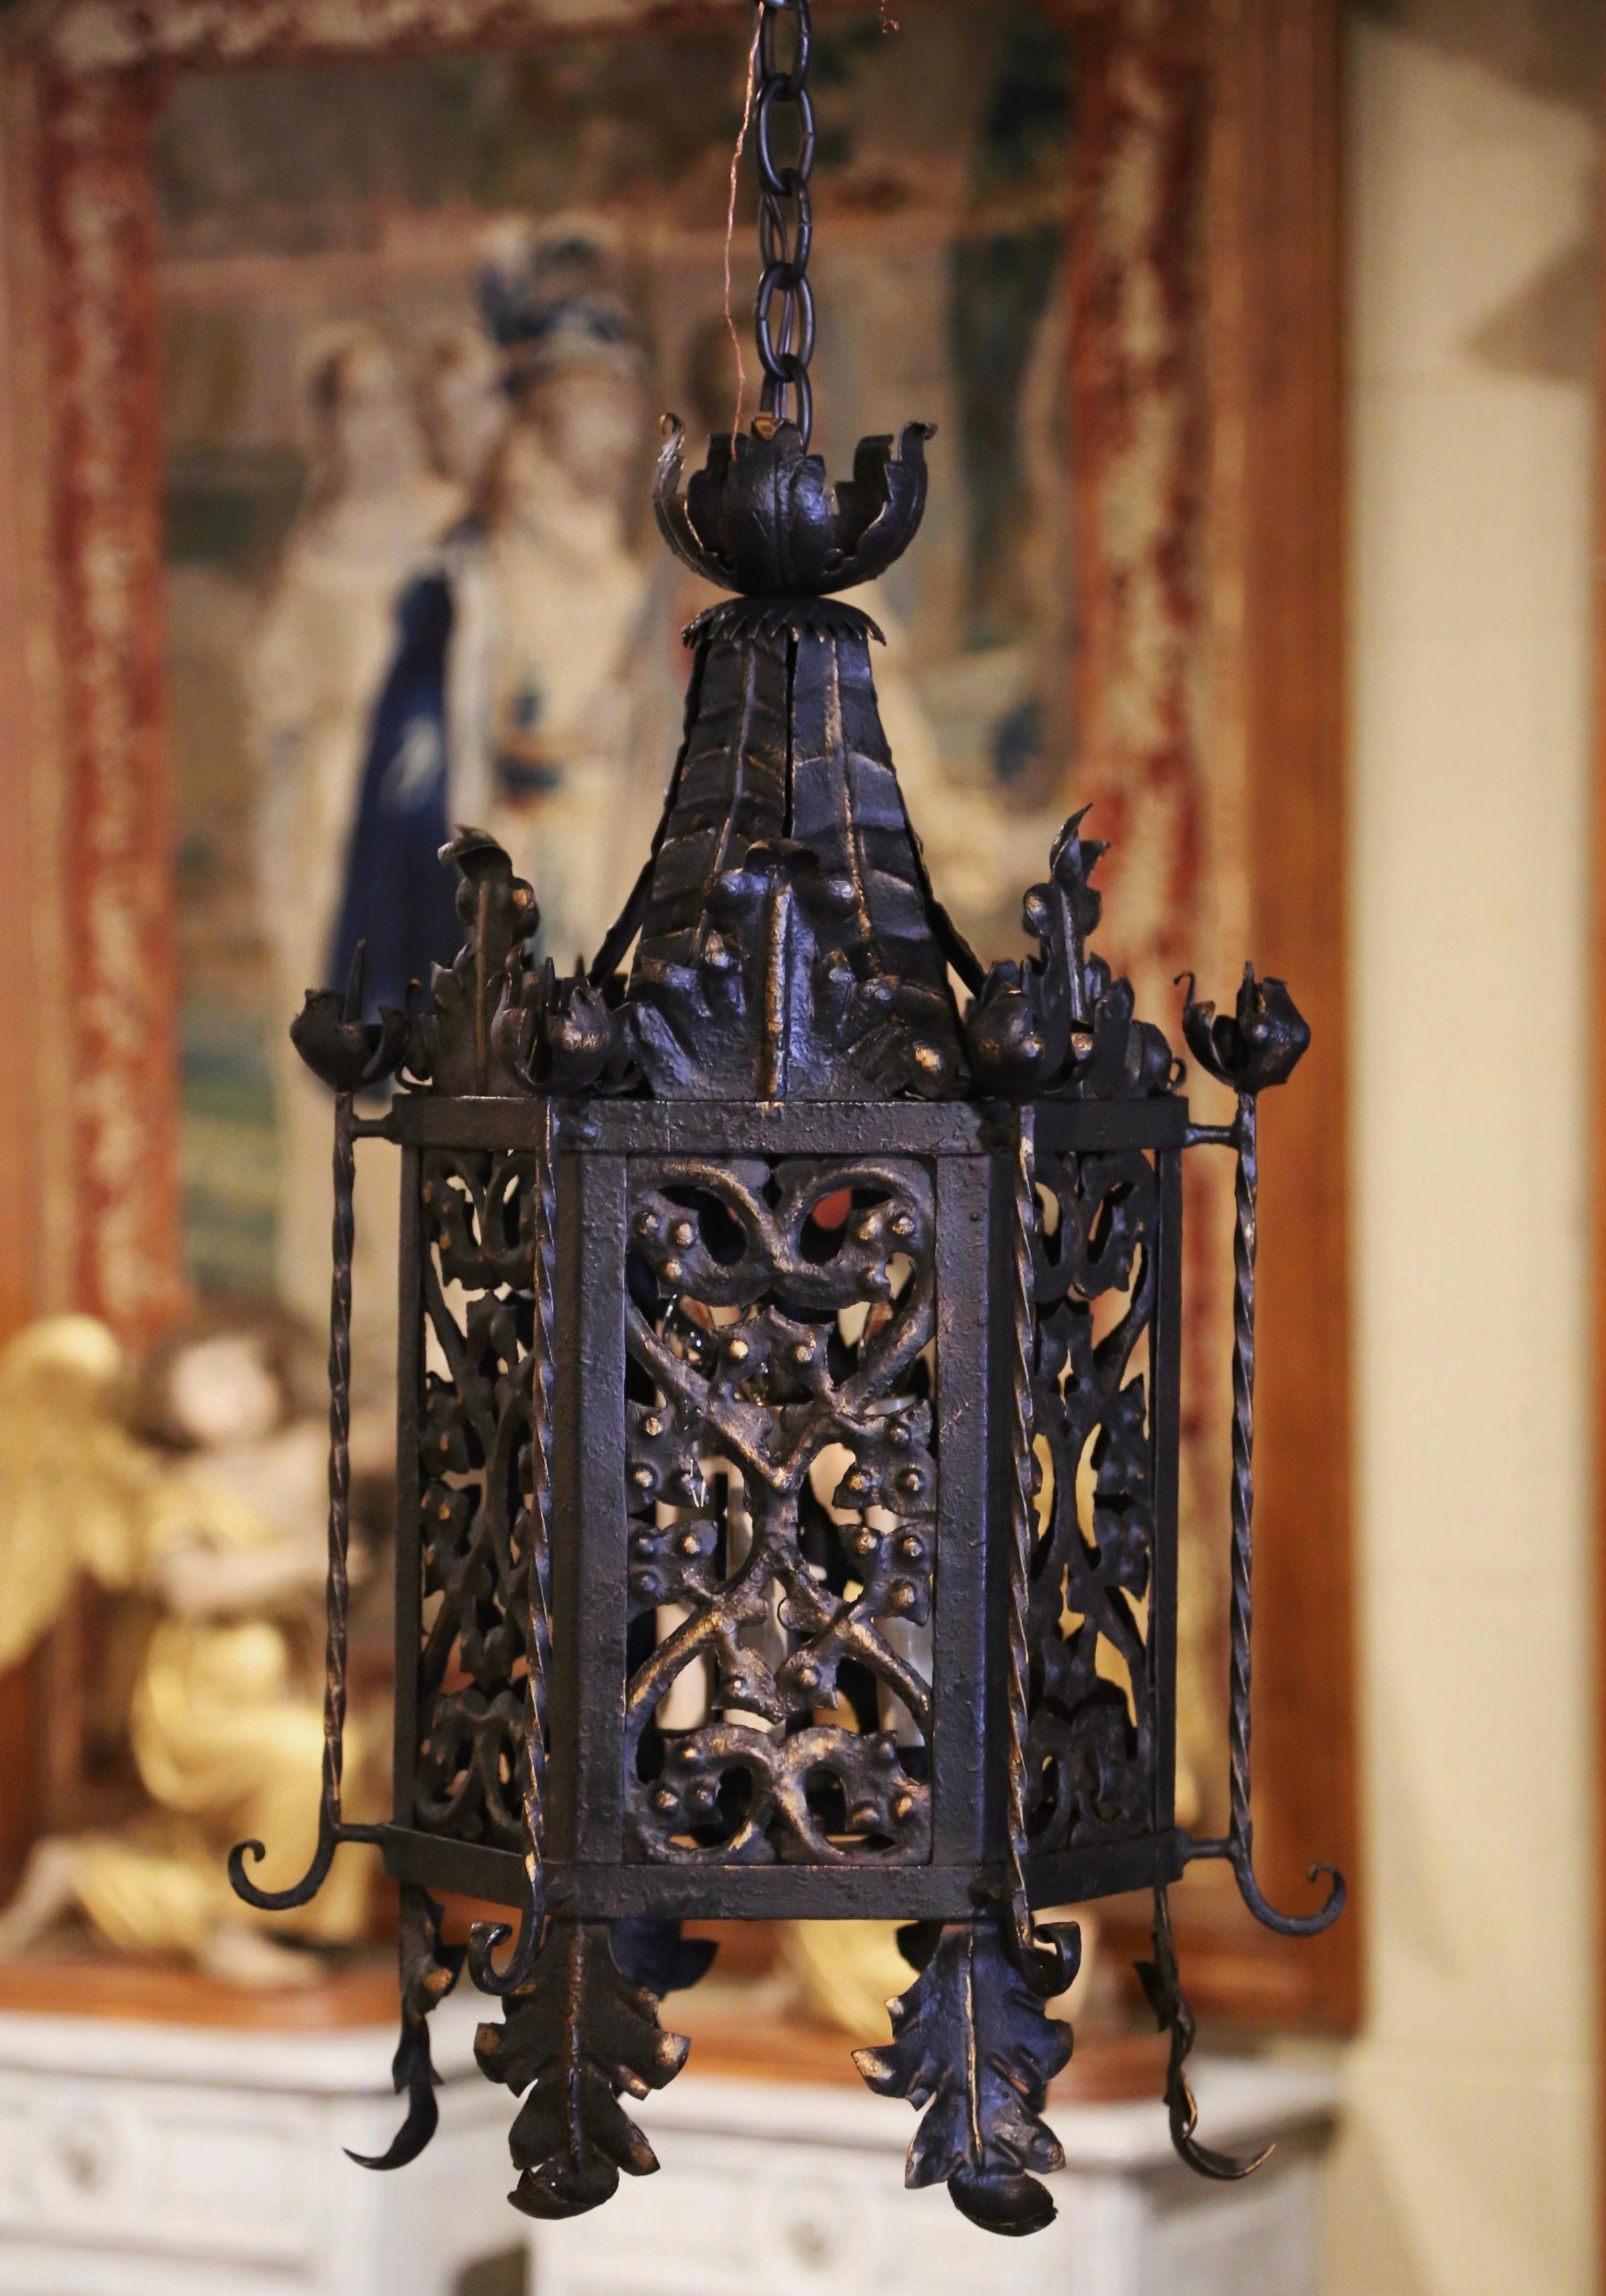 Crafted in France circa 1880, and hexagonal in shape with slant roof form top, the antique light fixture features pierced ornate, decorative scrolls throughout and embellished with acanthus leaf and floral motifs. The lantern has three inside lights